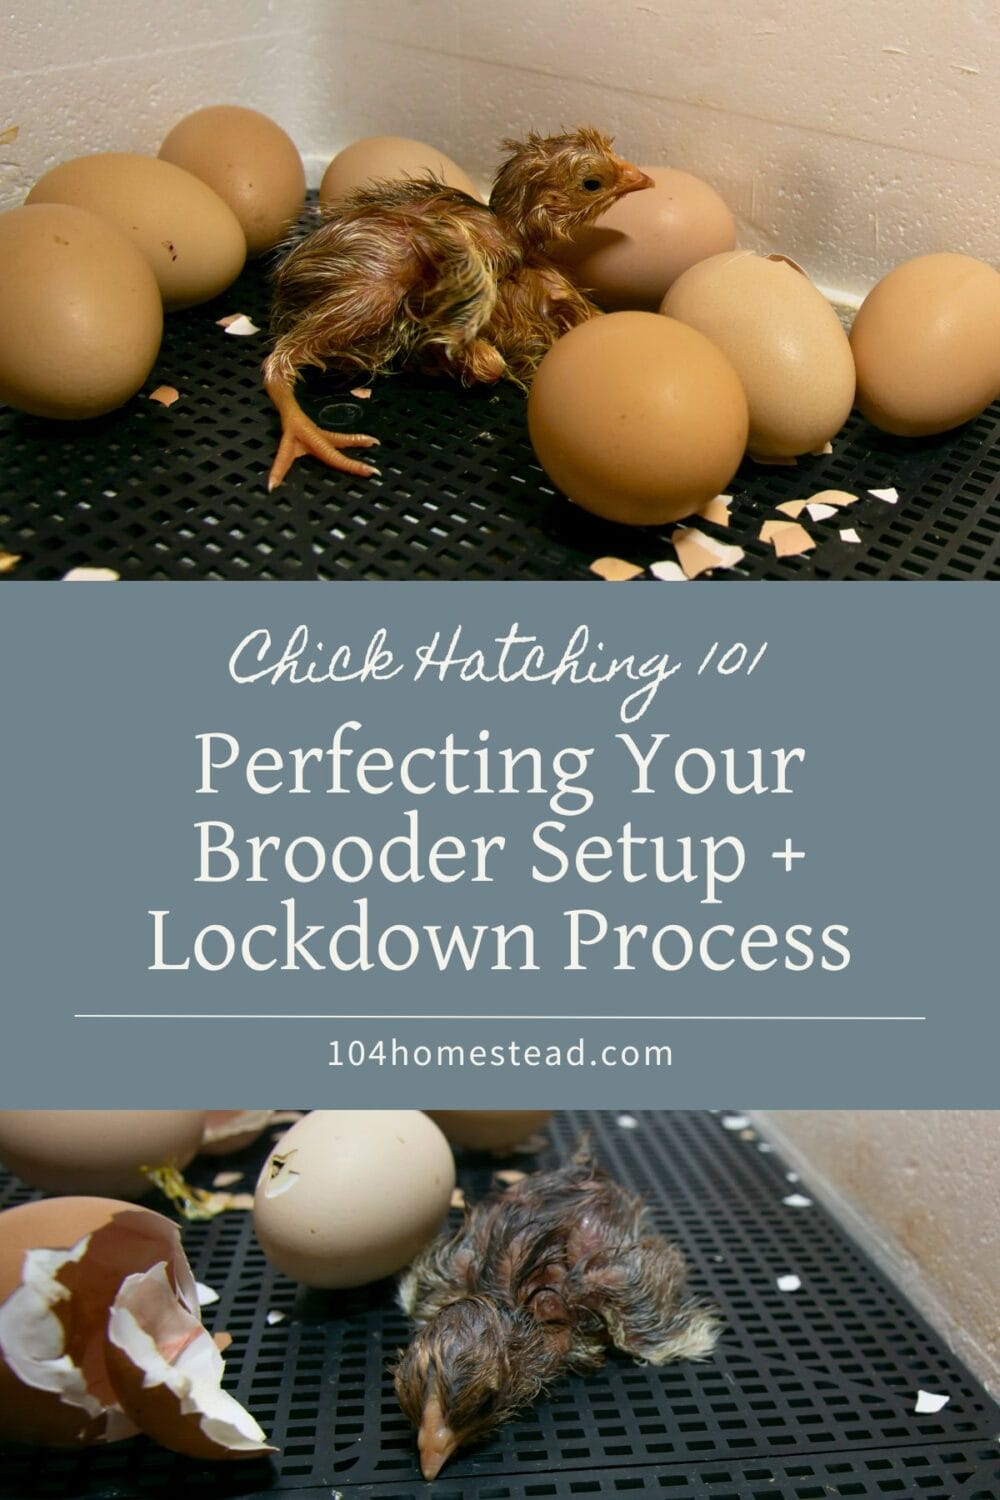 A Pinterest-friendly graphic for my post on setting up a chick brooder and how to perform lockdown on the incubator.